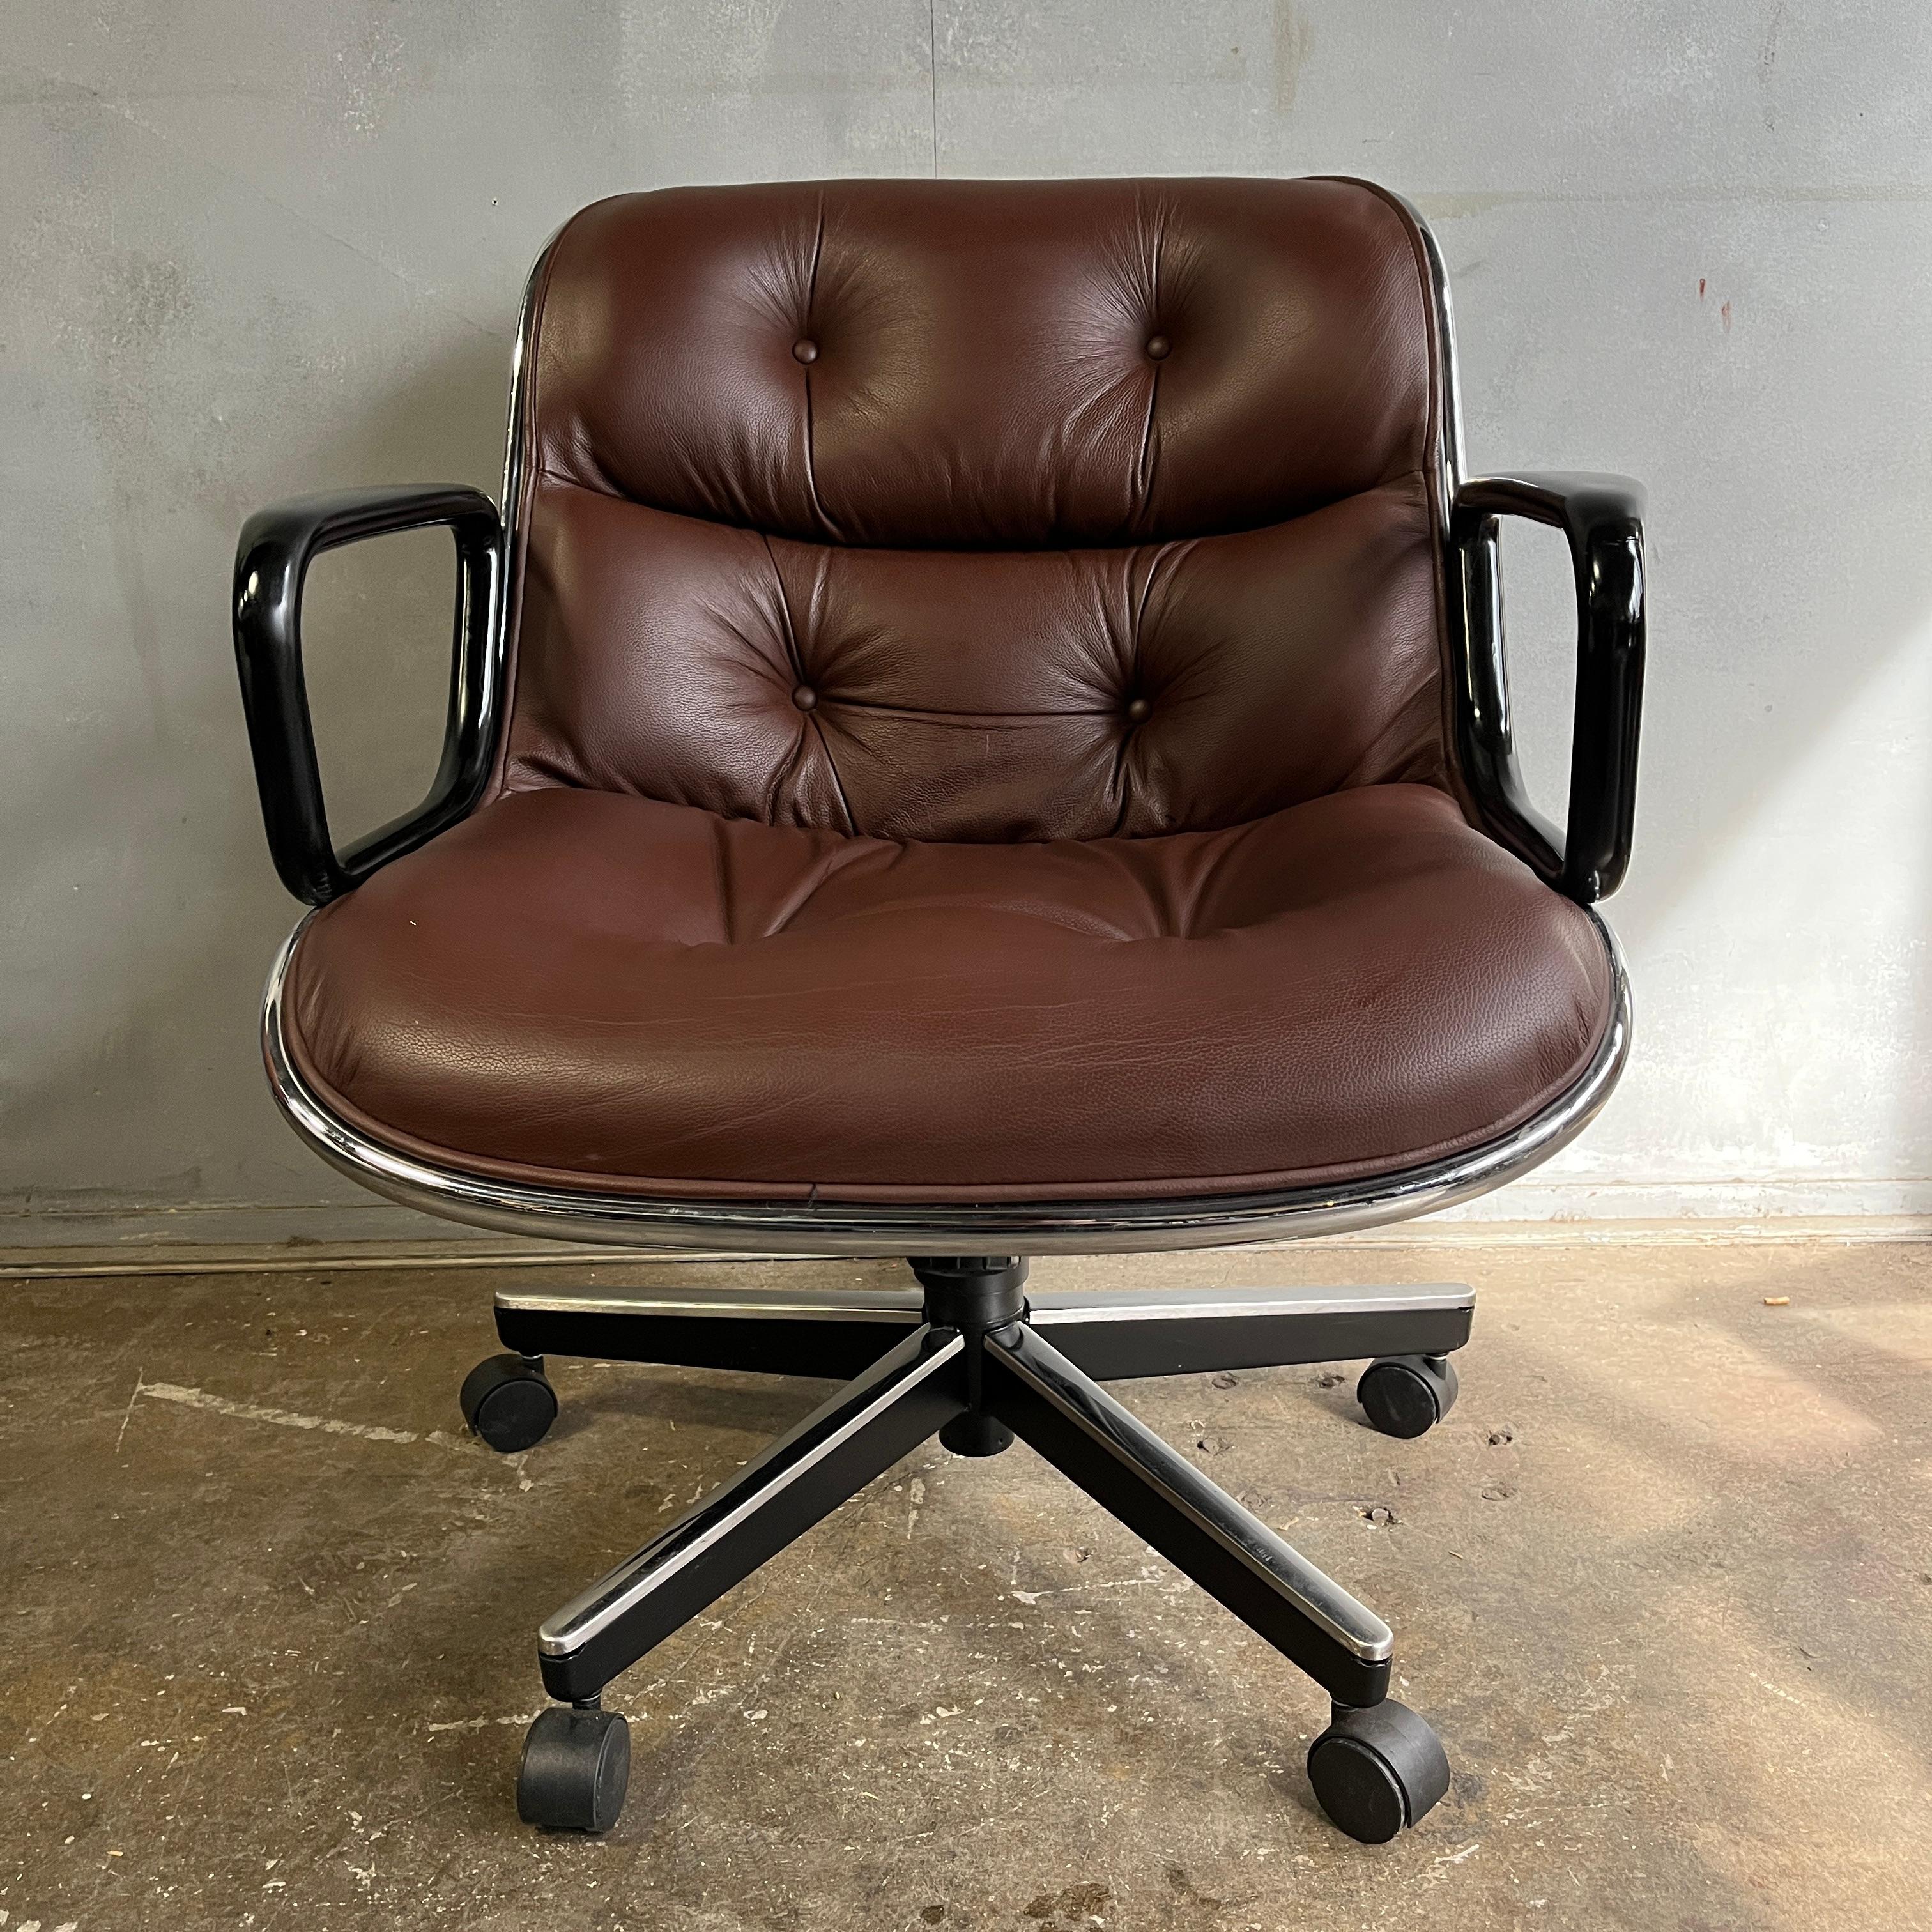 Charles pollock for Knoll office desk chair featuring brown leather upholstery. This executive office chair is an icon of Mid-Century Modern design and has been in continuous production by Knoll since its introduction in the 1960s. Designer Charles